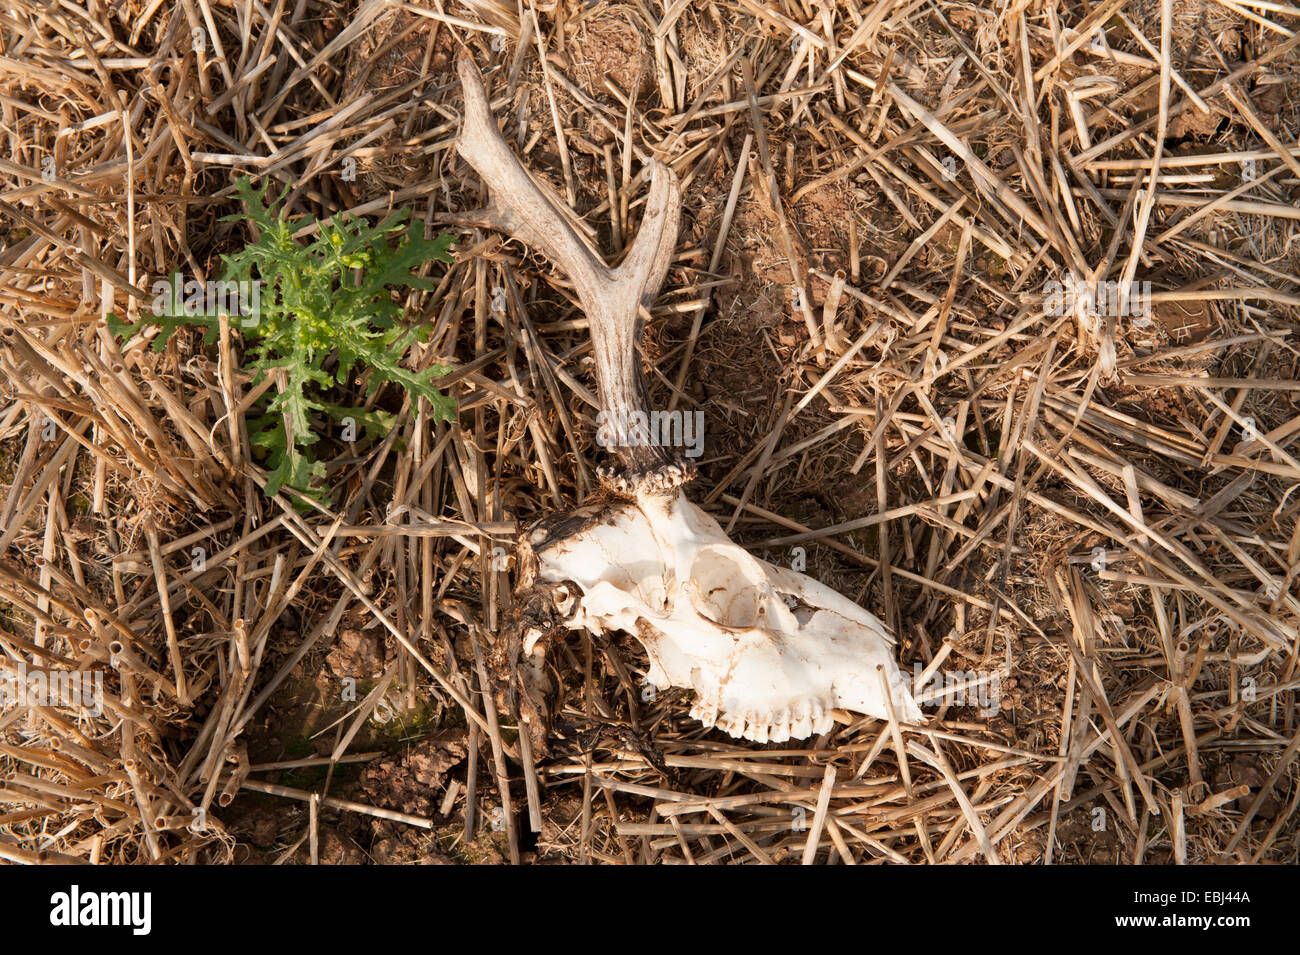 The Skull of a Deer with Antlers Lying in a Field on a Farm near Stratford upon Avon, WArwickshire, England, UK Stock Photo